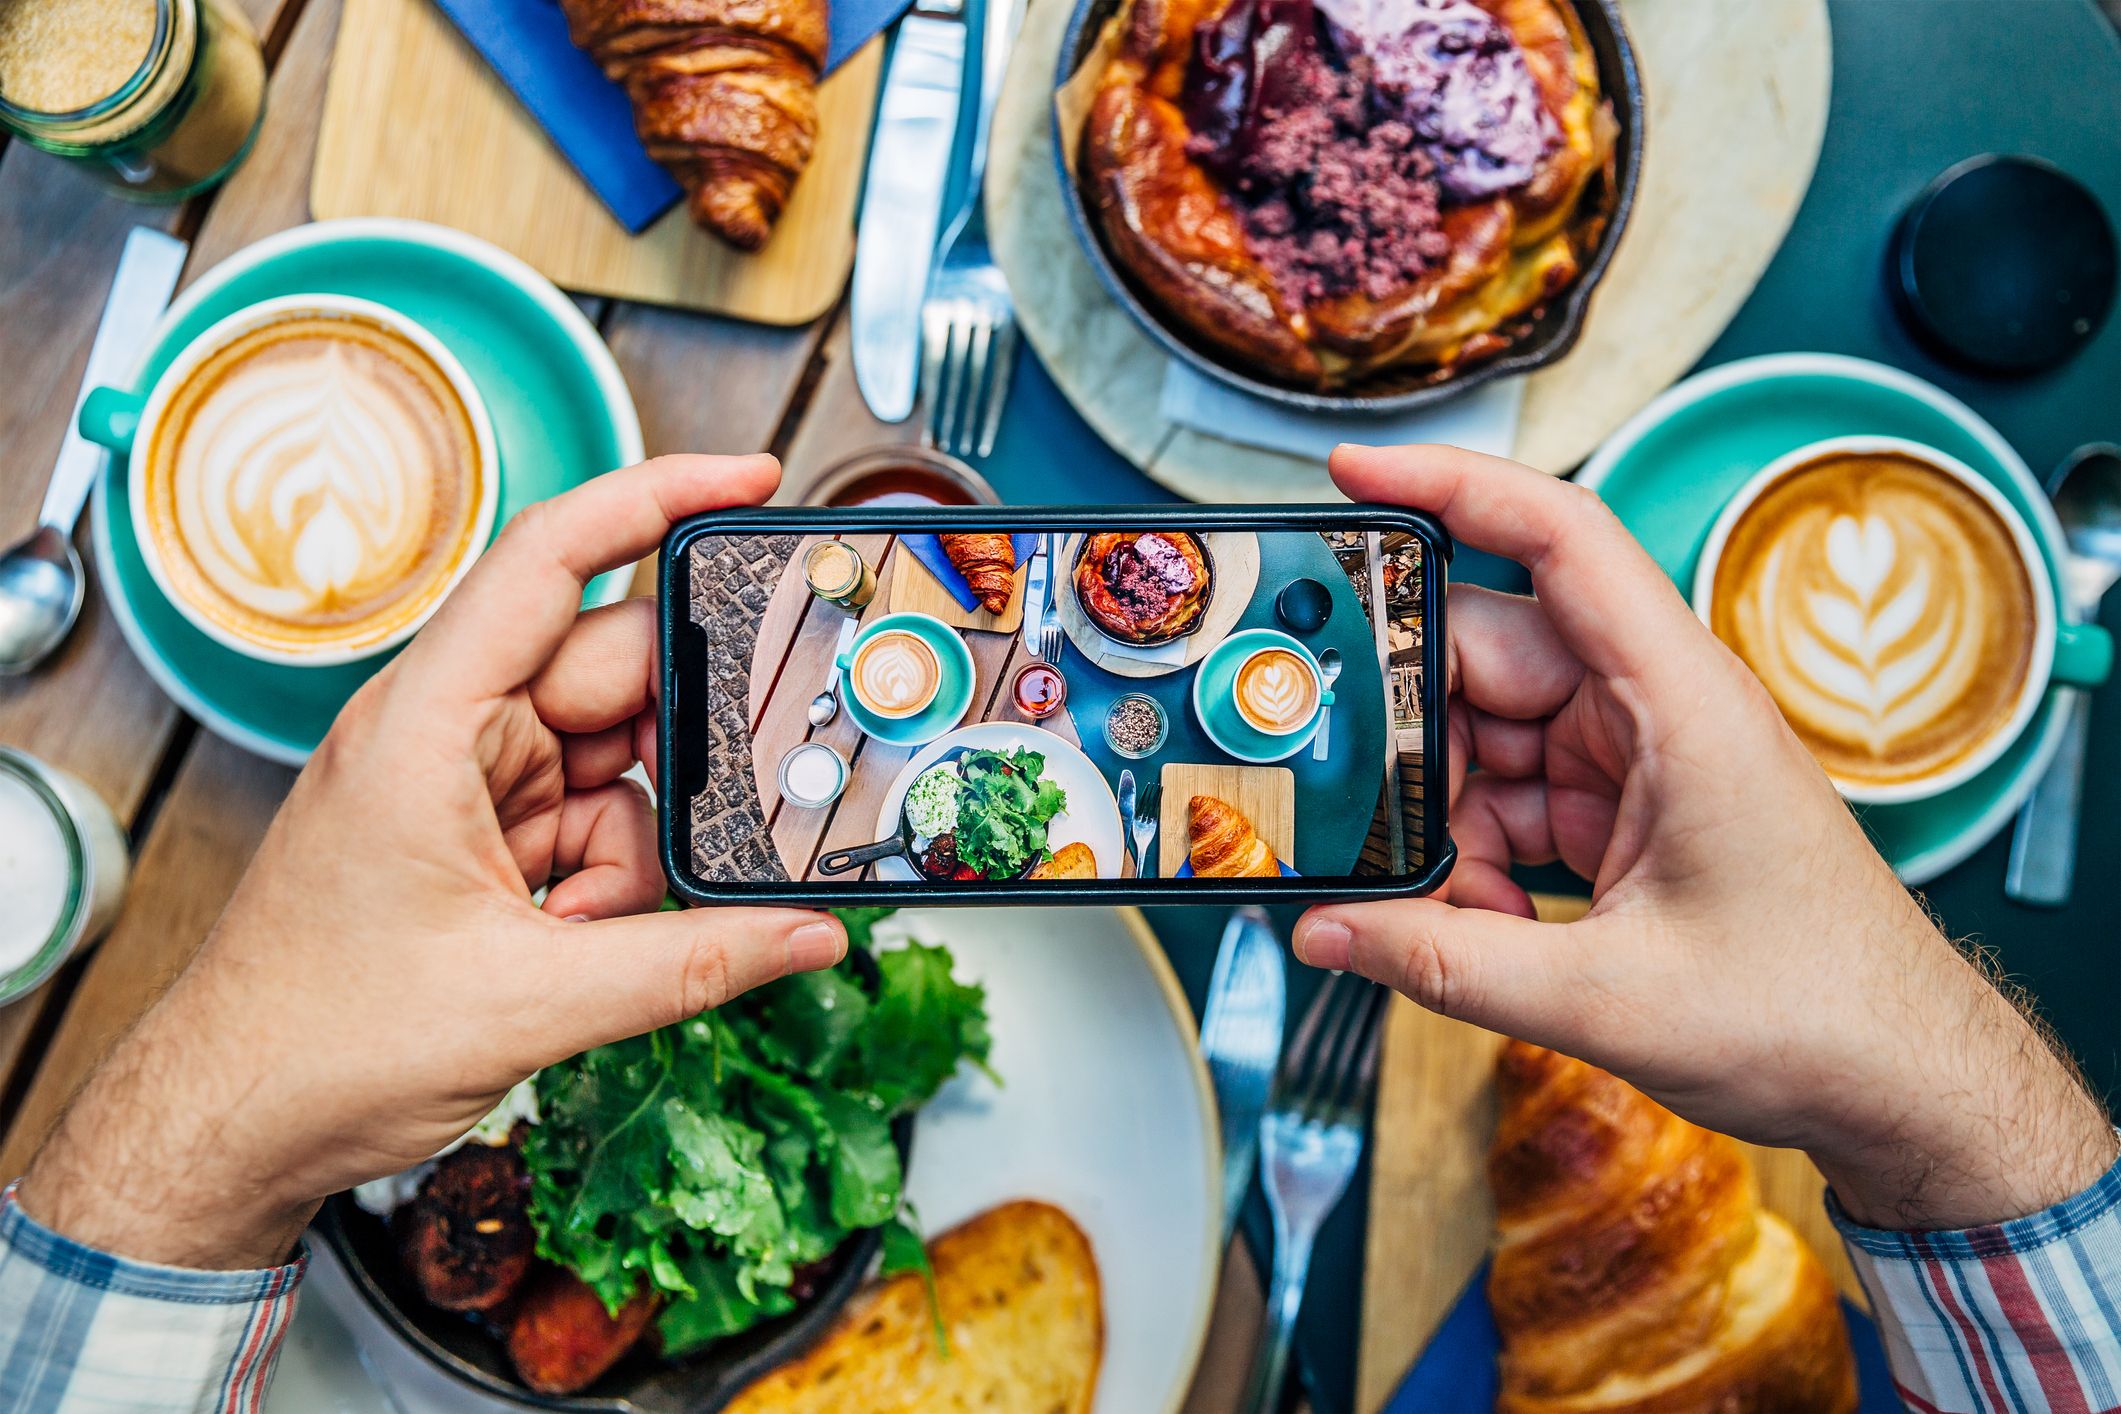 How Social Media Impacts Eating Habits, According to New Research